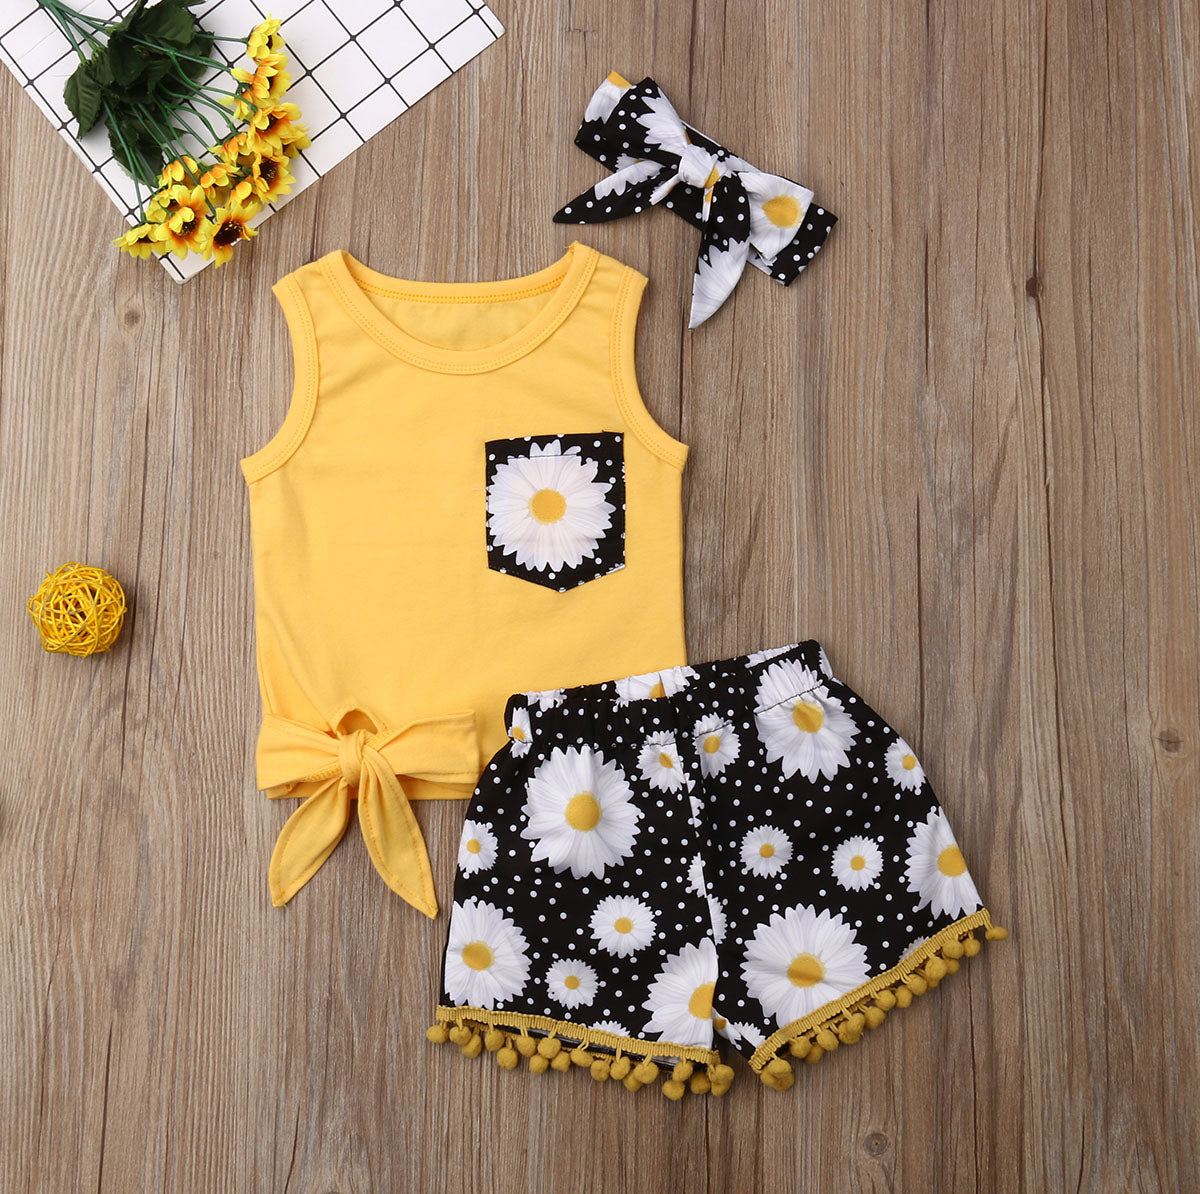 Toddler Kids Floral Tops T-Shirt Short Pants Outfit